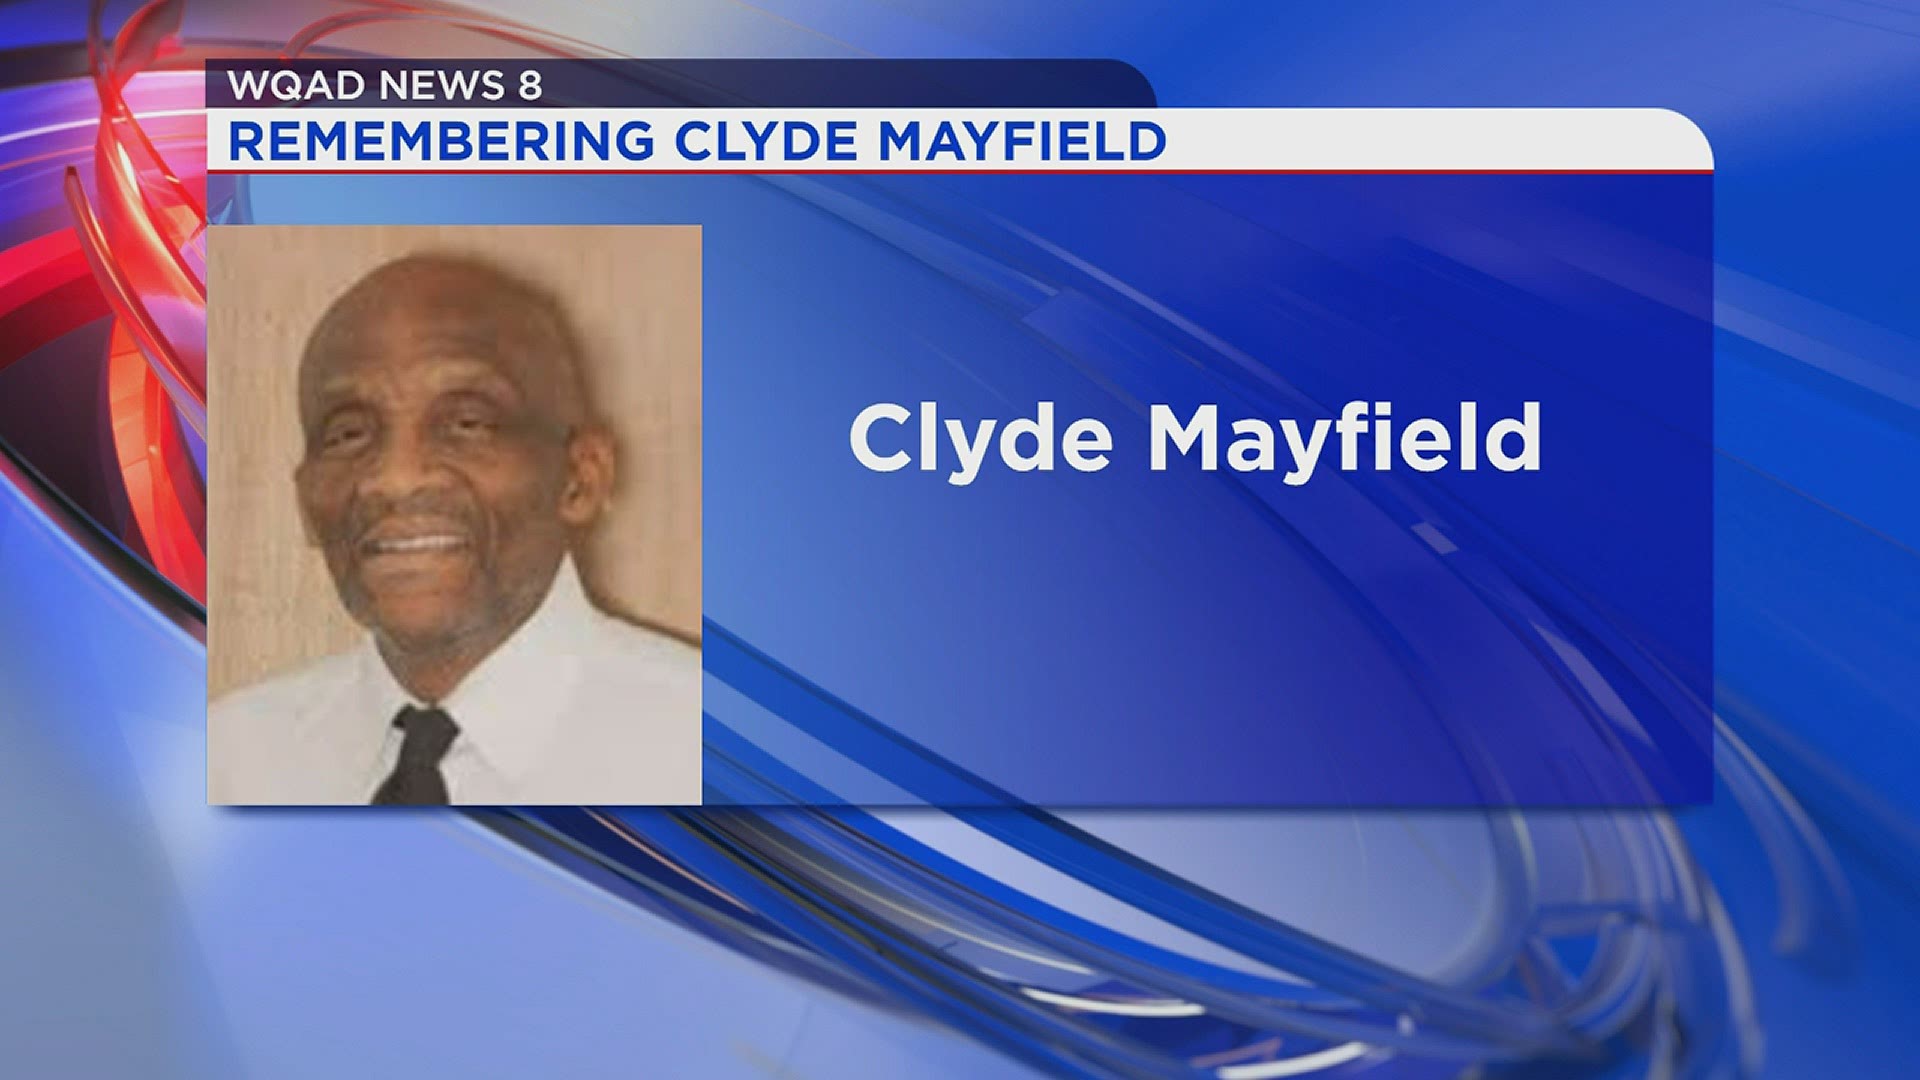 Mayor Mike Matson honored the longtime leader Clyde Mayfield Wednesday, August 5th.